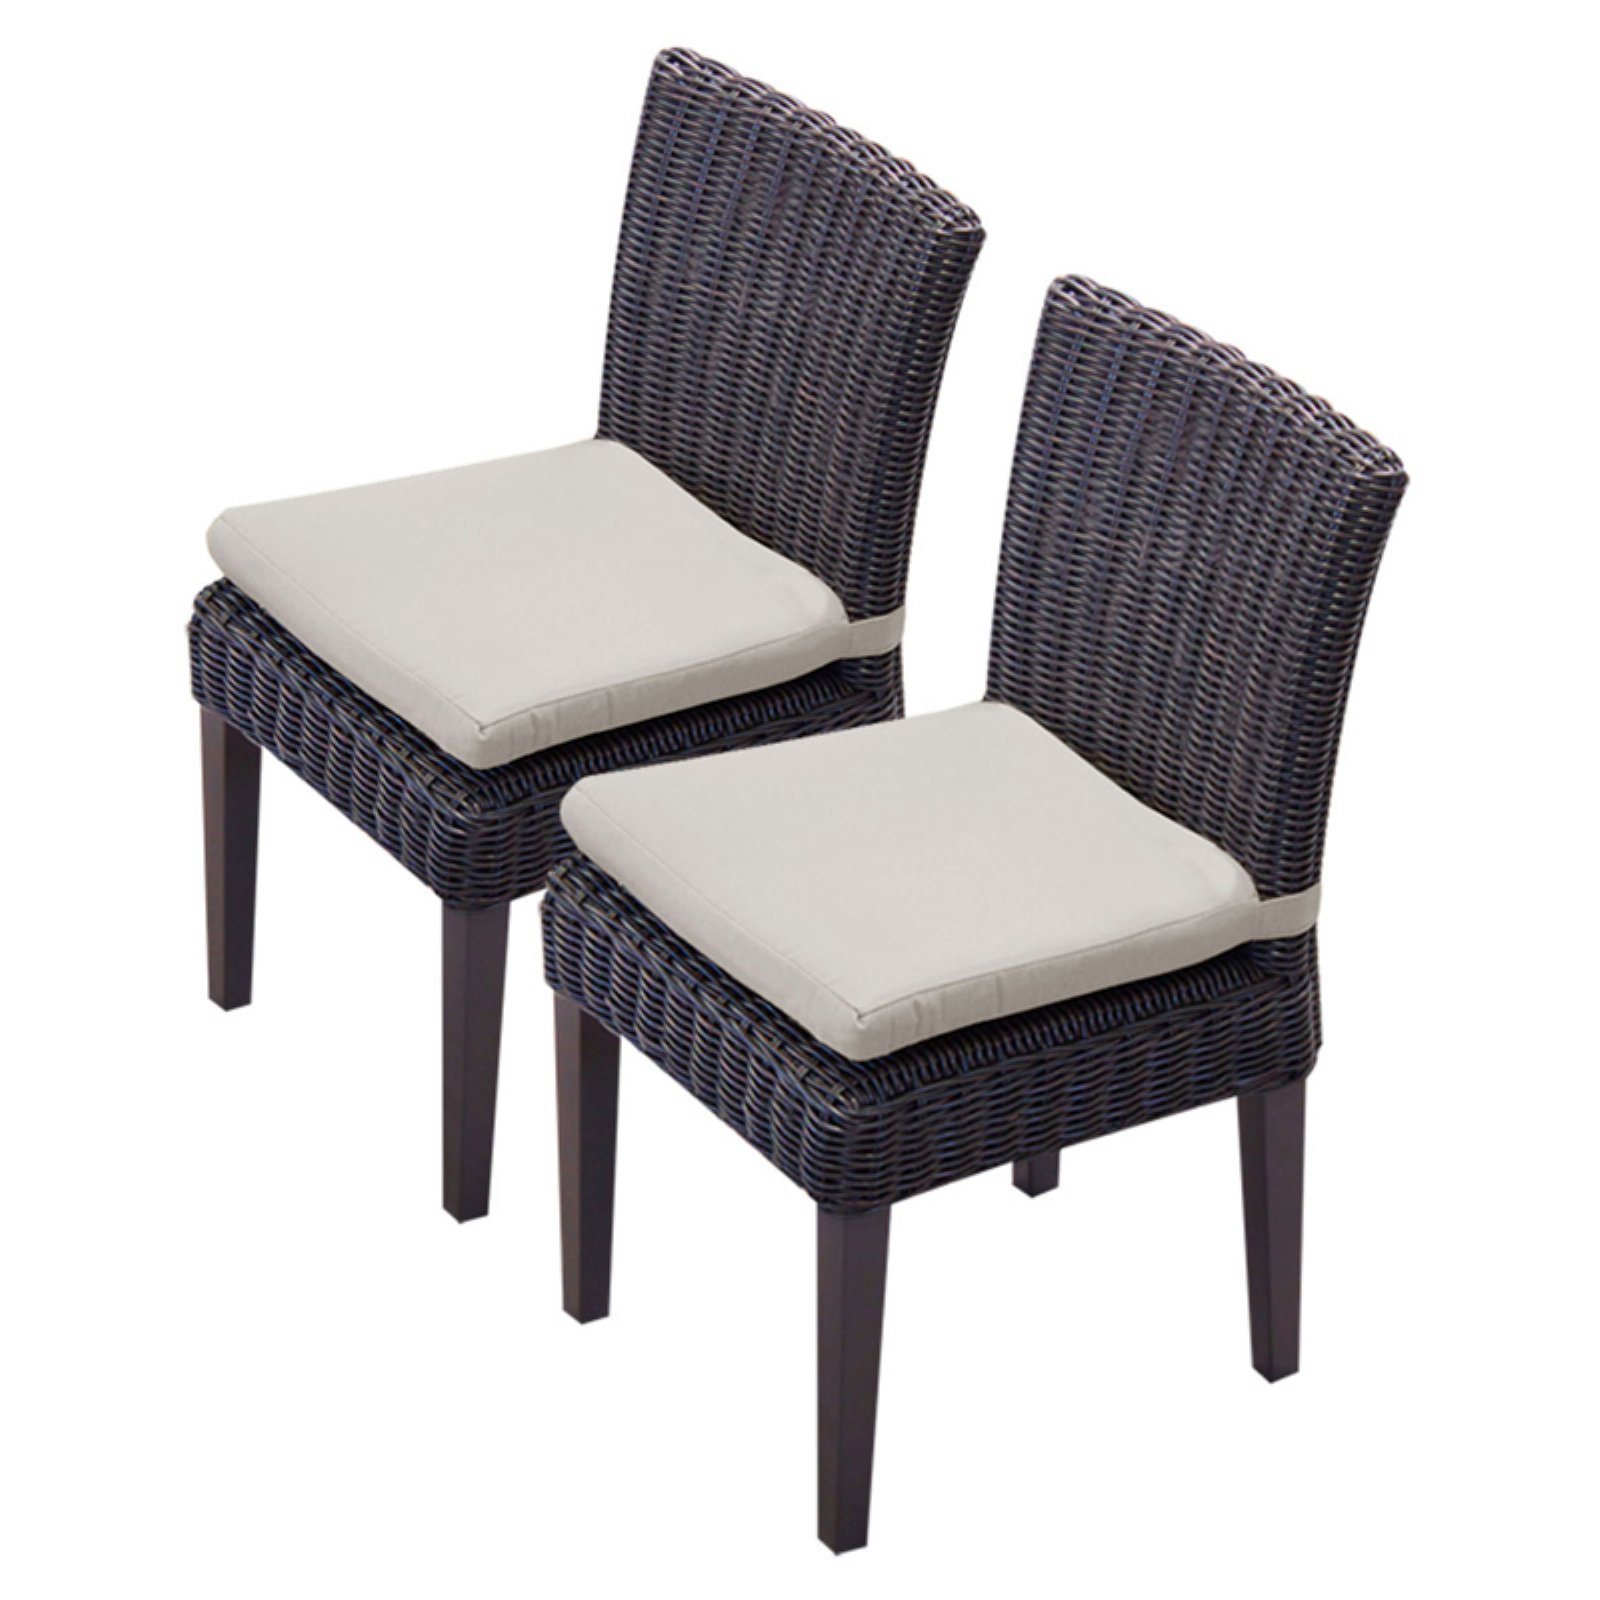 TK Classics Venice Outdoor Dining Side Chair - Set of 2 with 4 Cushion Covers - image 1 of 1